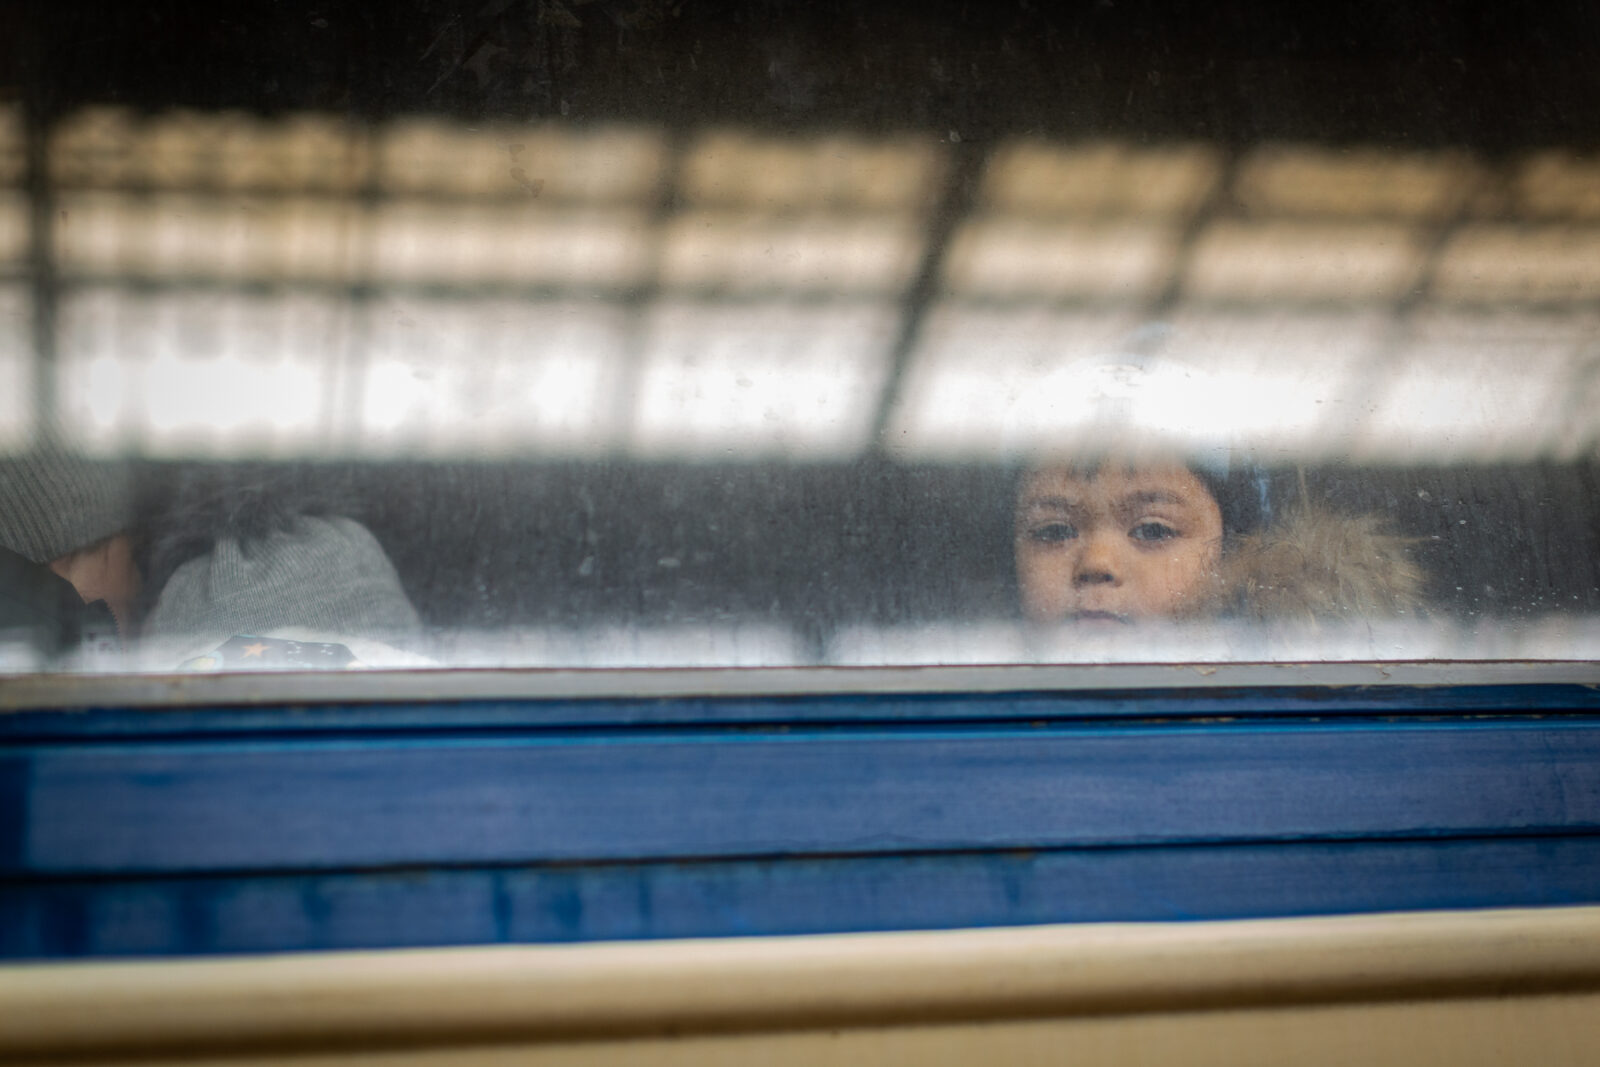 Ukrainians fleeing from the fighitng pass through Lviv Train Station on their way to neighboring European countries.